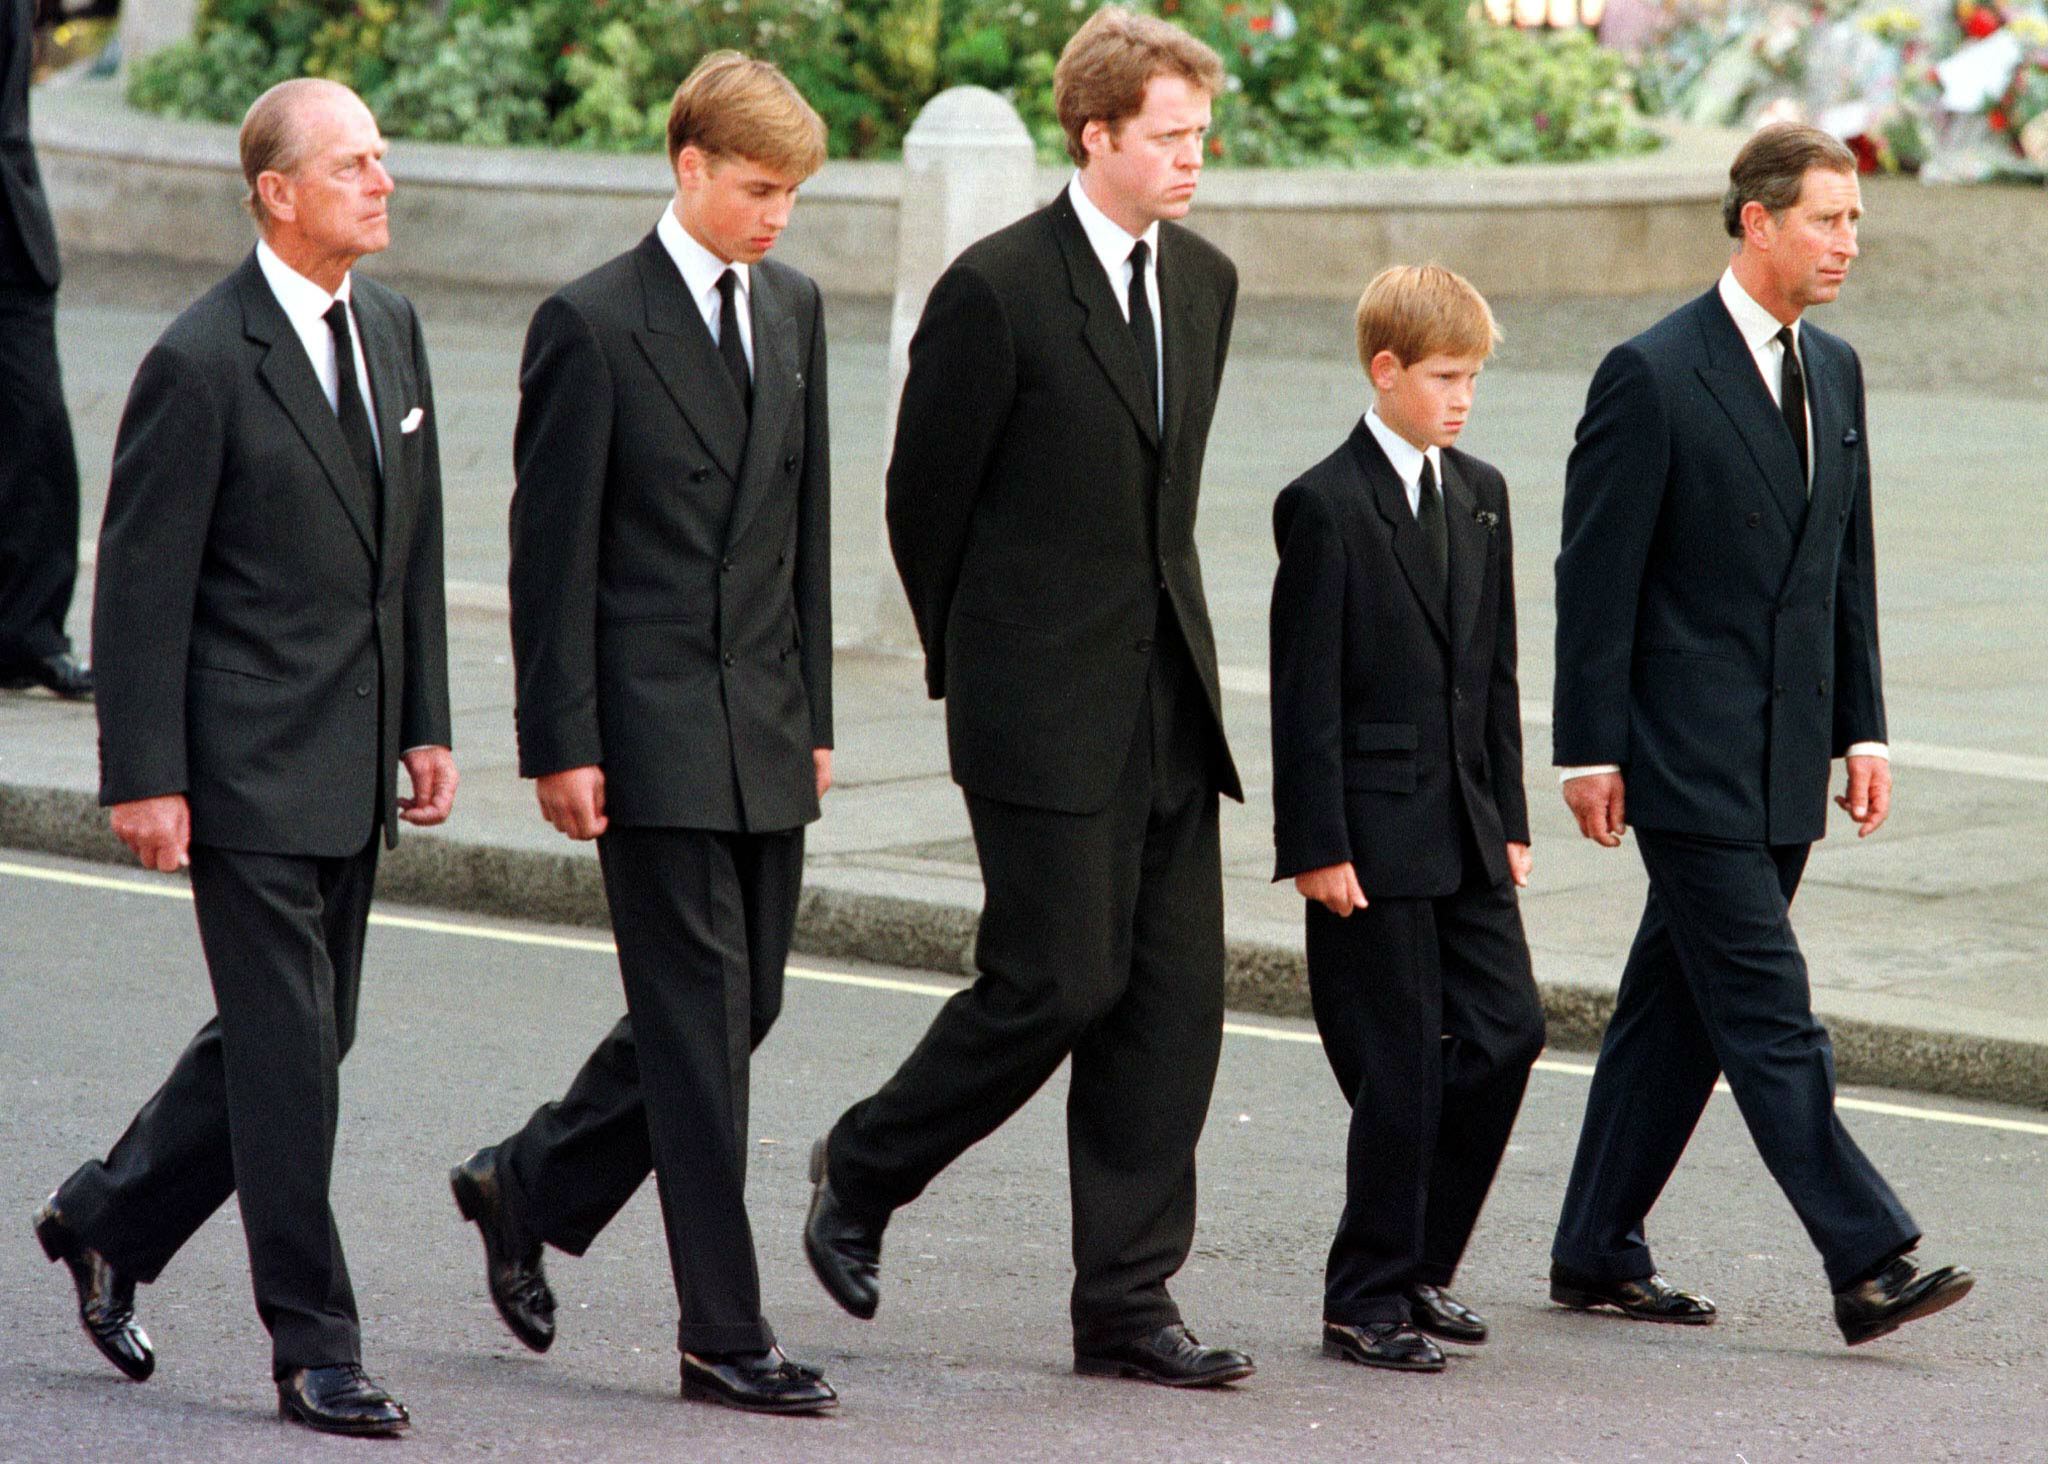 <p>On Sept. 6, 1997, a funeral for Princess Diana, whose <a href="https://www.wonderwall.com/celebrity/royals/biggest-royals-news-of-august-2021-490239.gallery?photoId=490257">divorce </a>from Prince Charles (now King Charles III) had been finalized one year earlier, was held in London six days after she died in Paris following a tragic car crash. </p><p>Five of Princes Diana's male family members -- former father-in-law Prince Philip, son Prince William, brother Charles Spencer, 9th Earl Spencer, son Prince Harry and ex-husband Prince Charles (now King Charles III) -- followed her coffin past hundreds of thousands of mourners during her funeral procession to London's Westminster Abbey in London on Sept. 6, 1997.</p><p>Keep reading for <span>more photos from Diana's heartbreaking goodbye...</span></p>